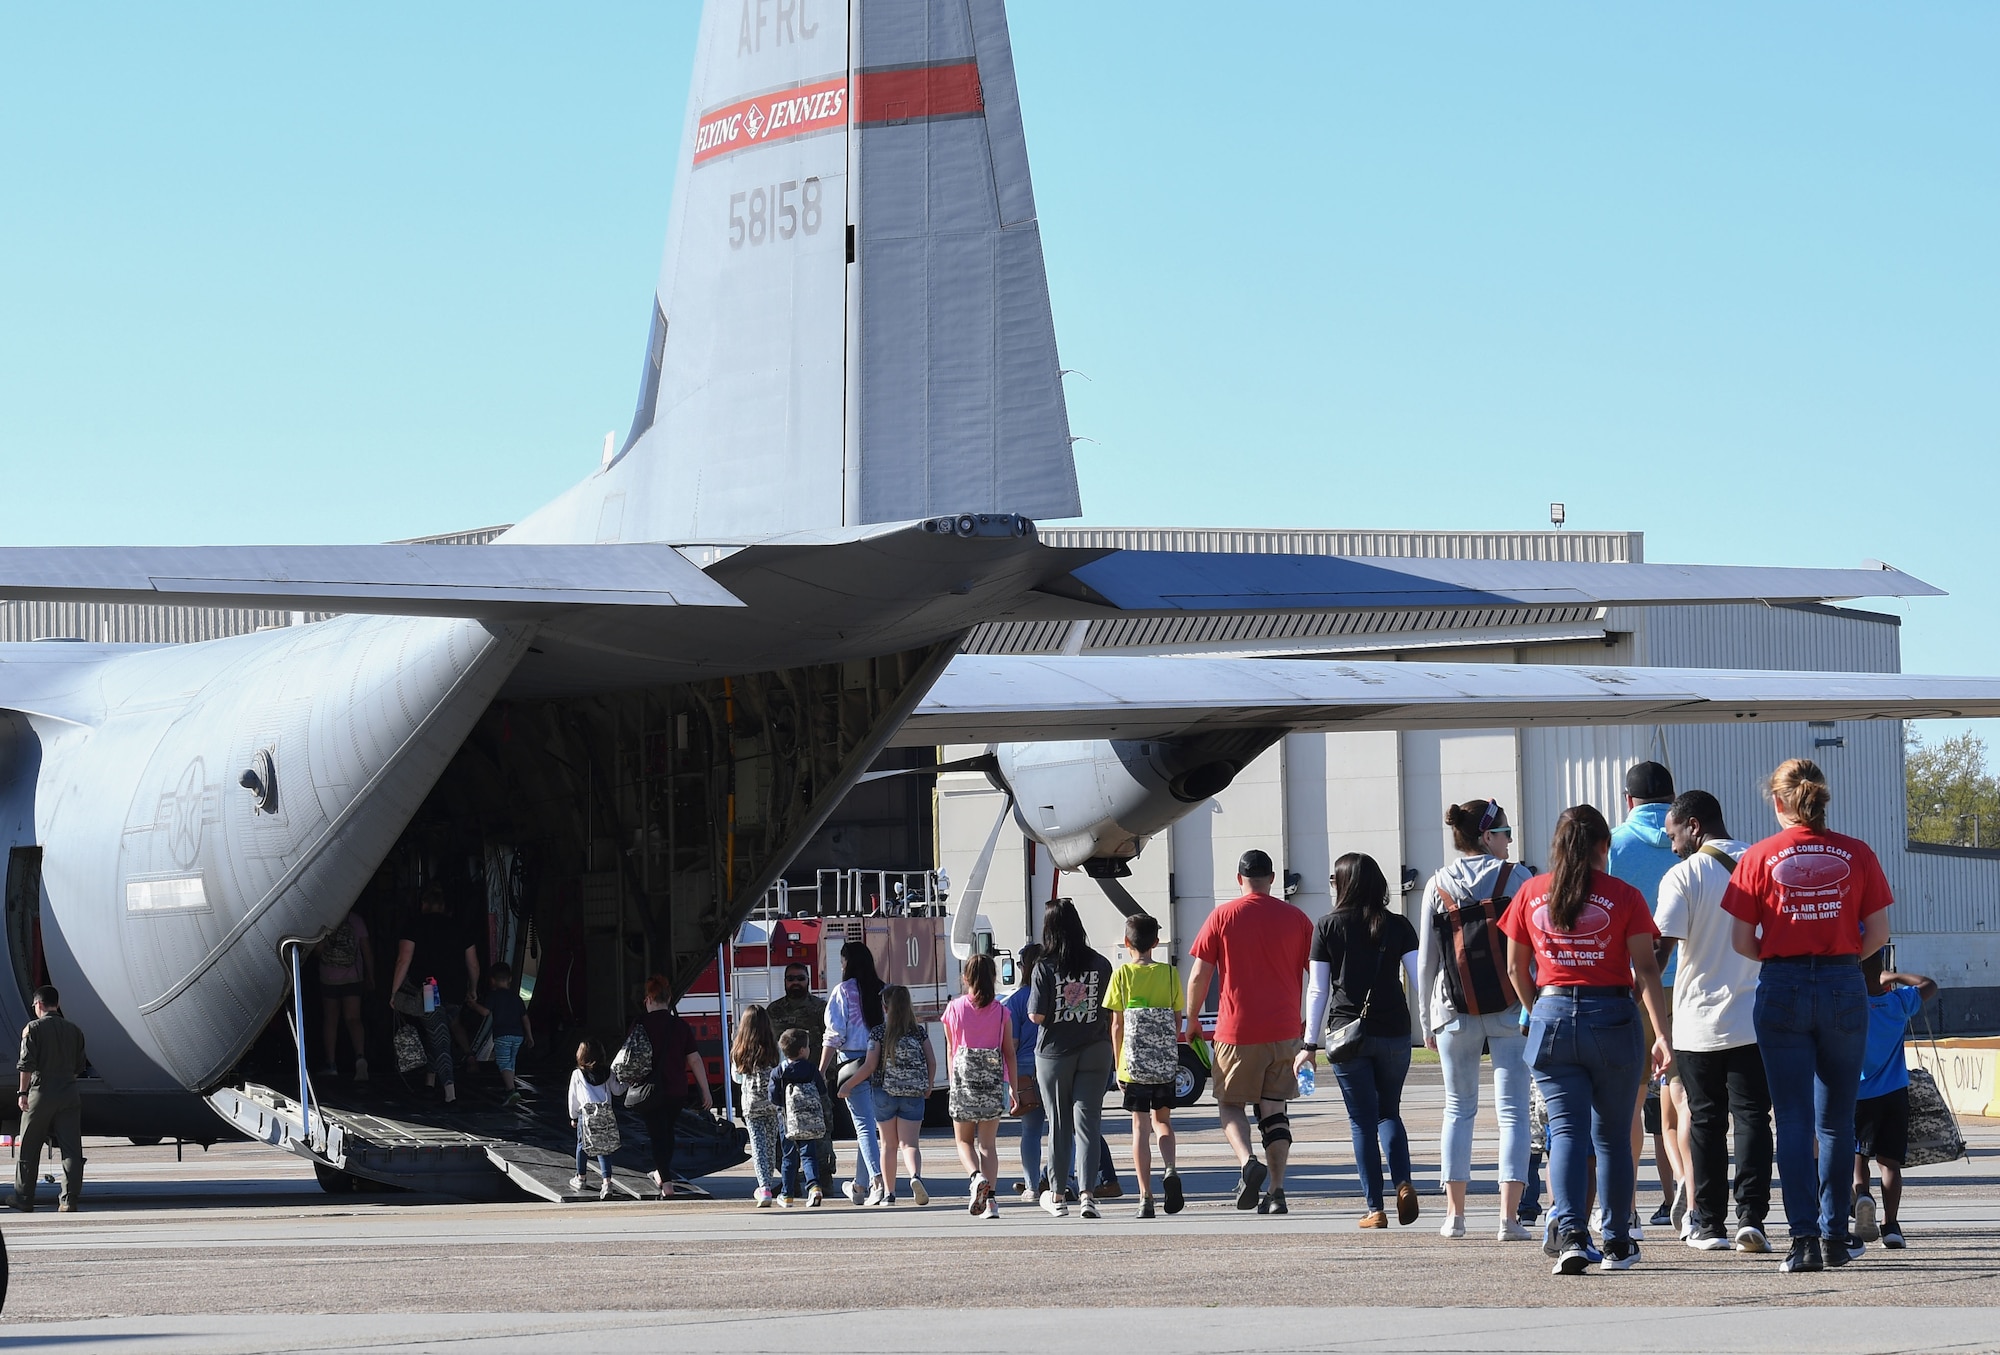 Keesler families make their way onto a W-C130 aircraft during Operation Hero at Keesler Air Force Base, Mississippi, March 4, 2023.